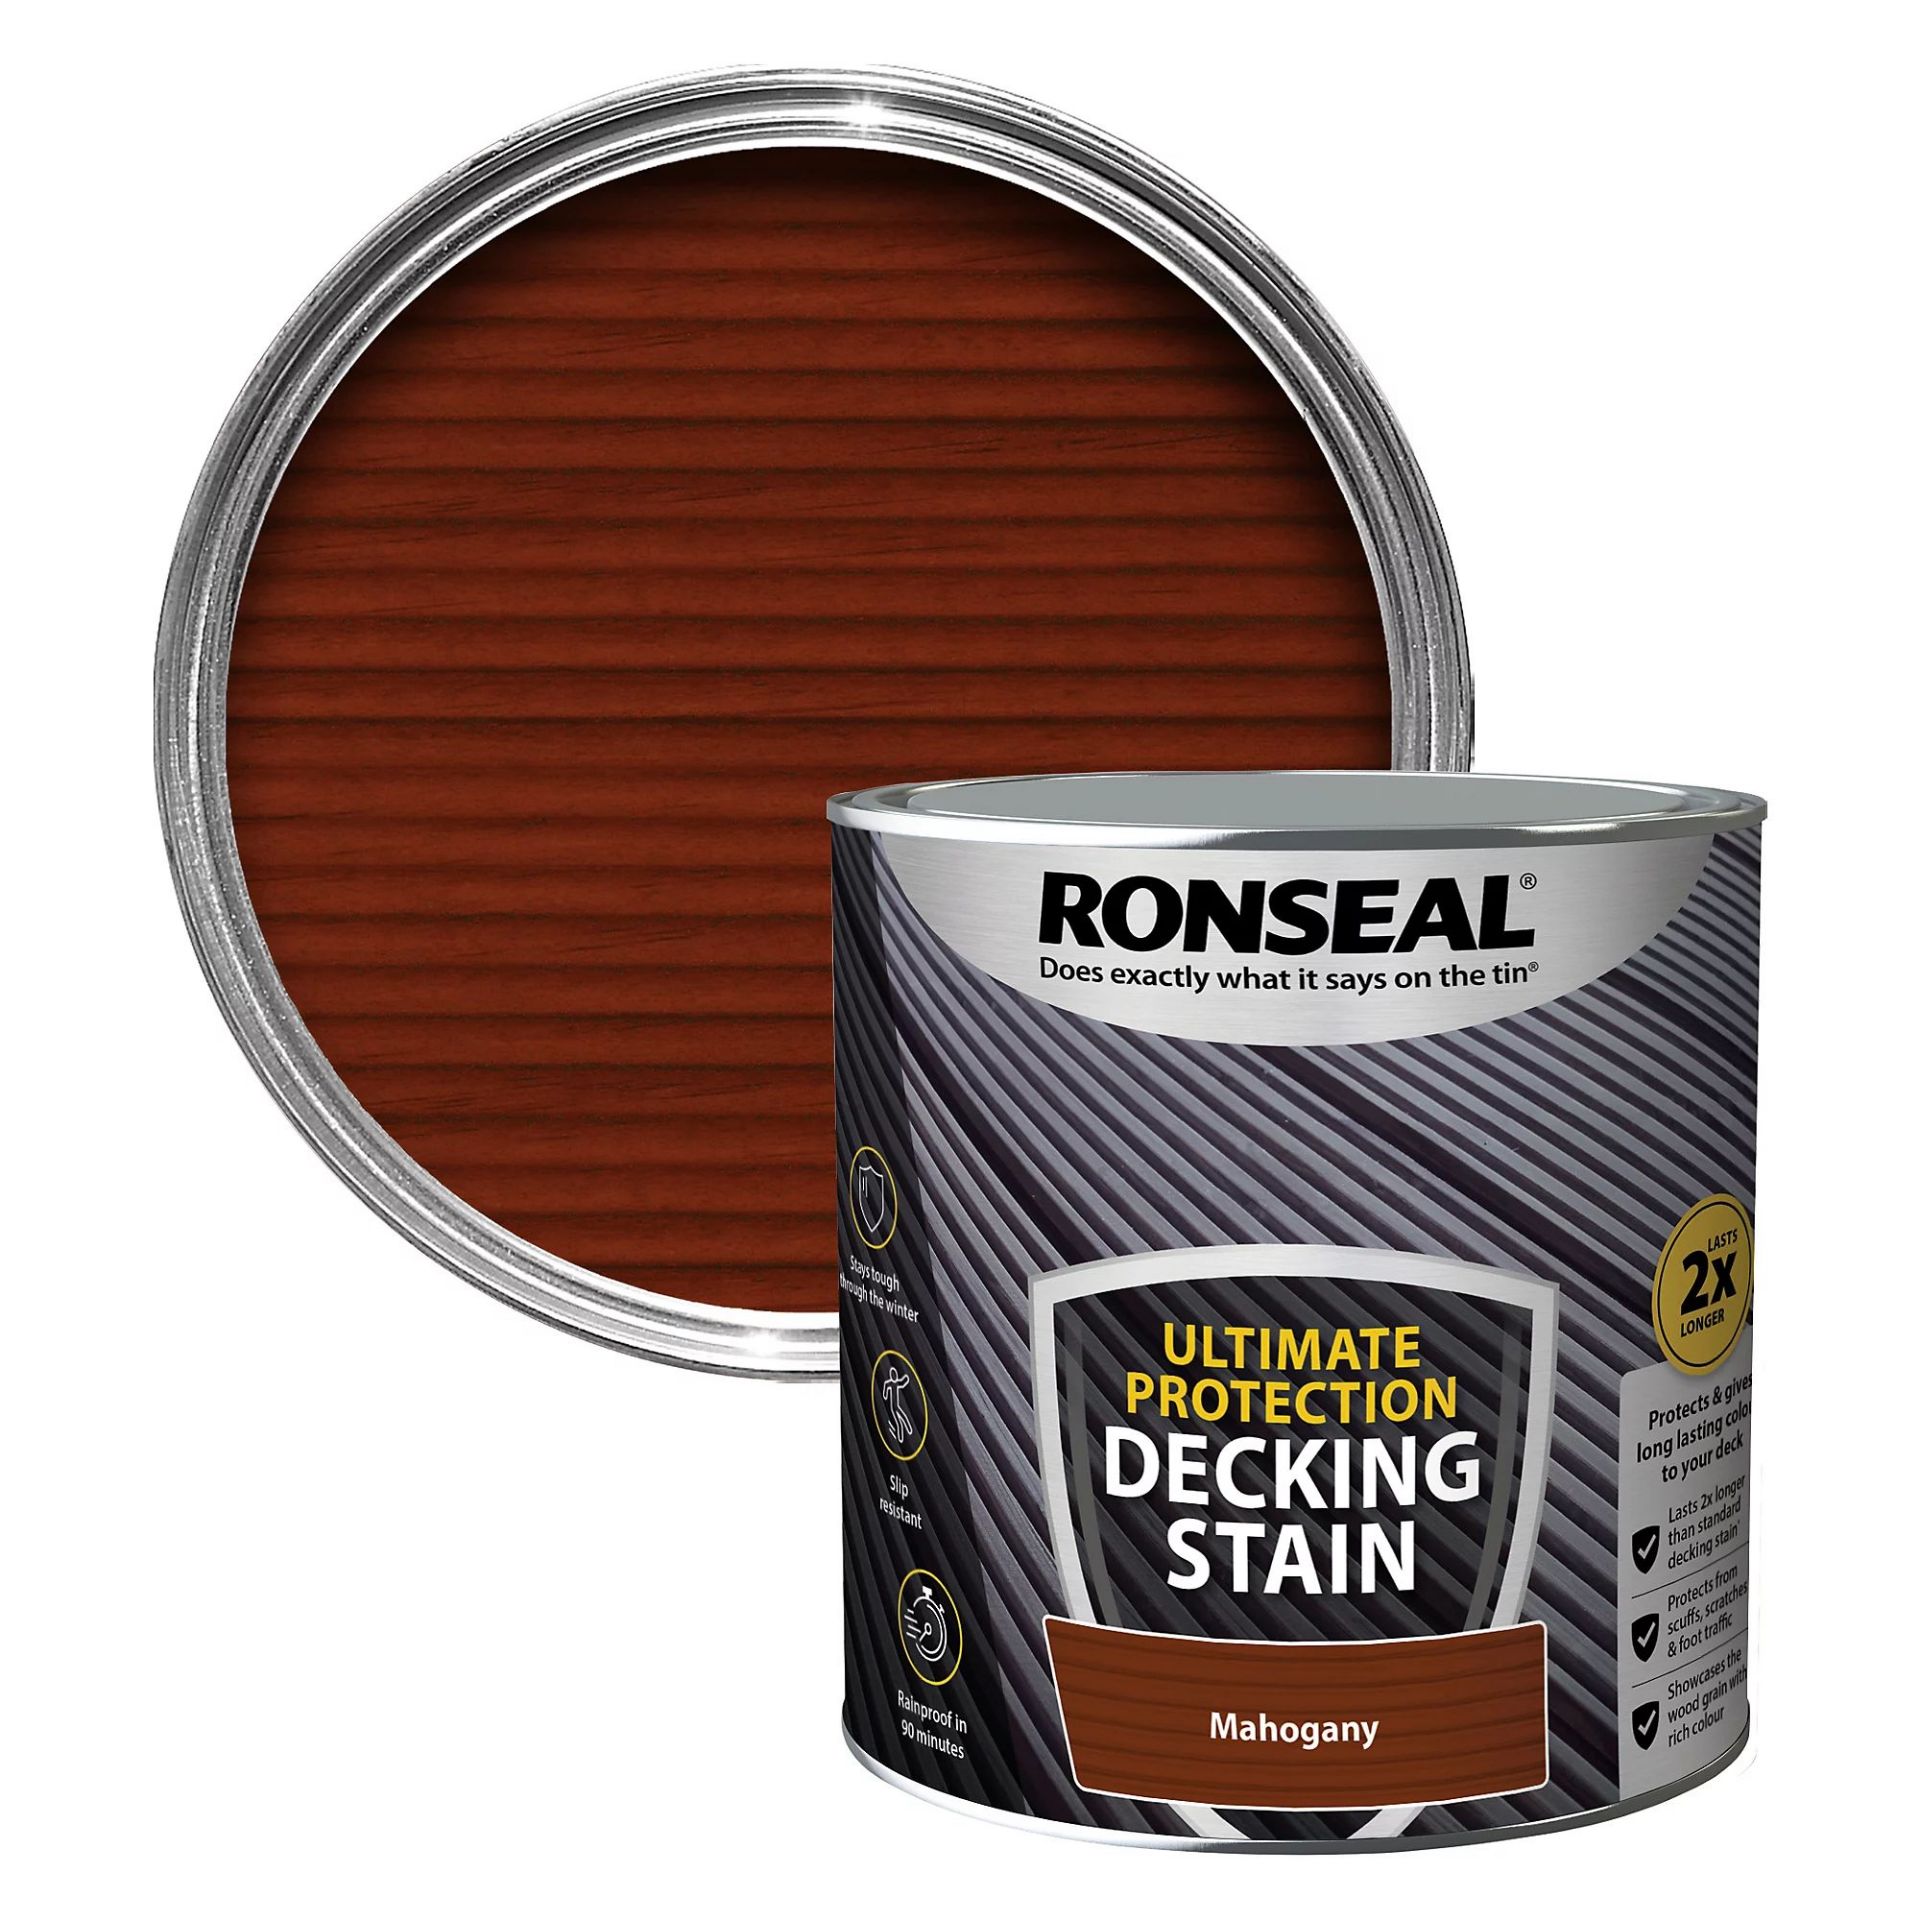 3 X BRAND NEW RONSEAL ULTIMATE PROTECTION 2.5L MAHOGANY DECKING STAIN S1-13